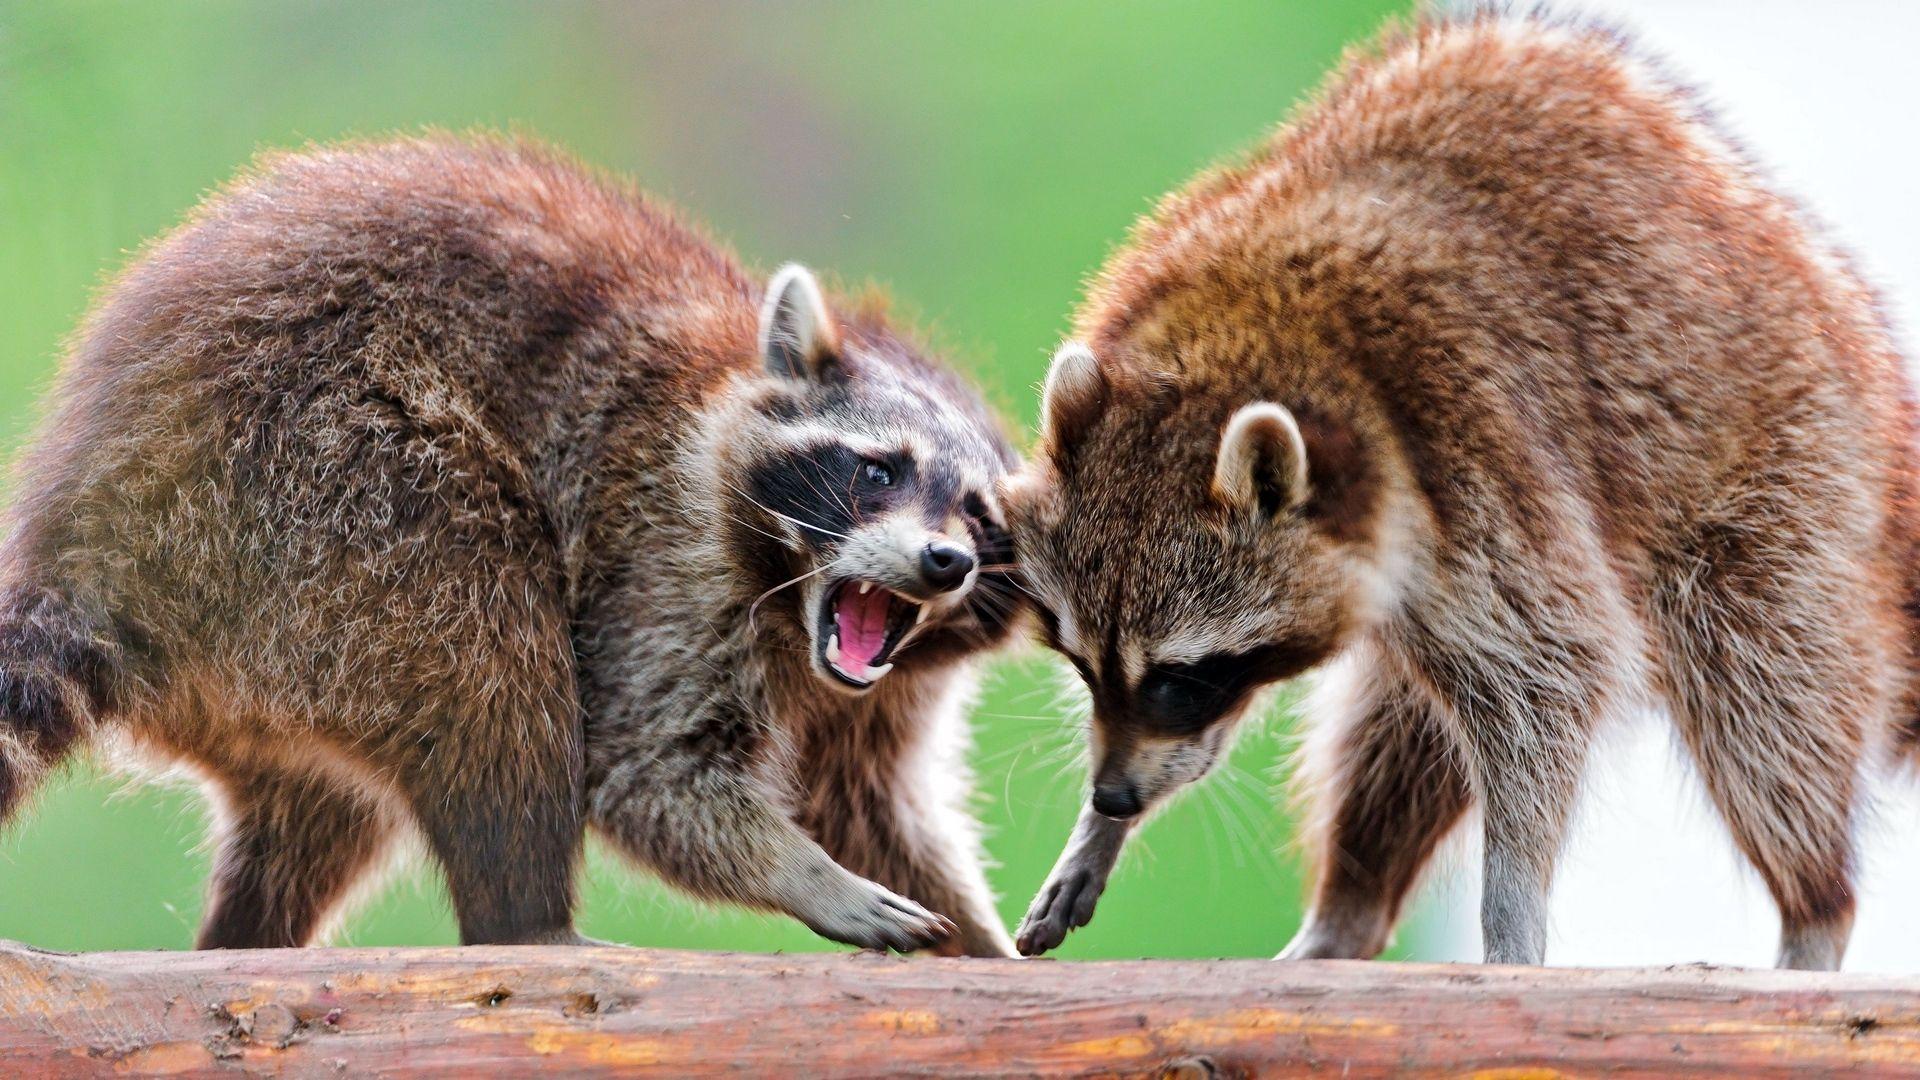 Download wallpapers raccoons, raccoon, couple, fight full